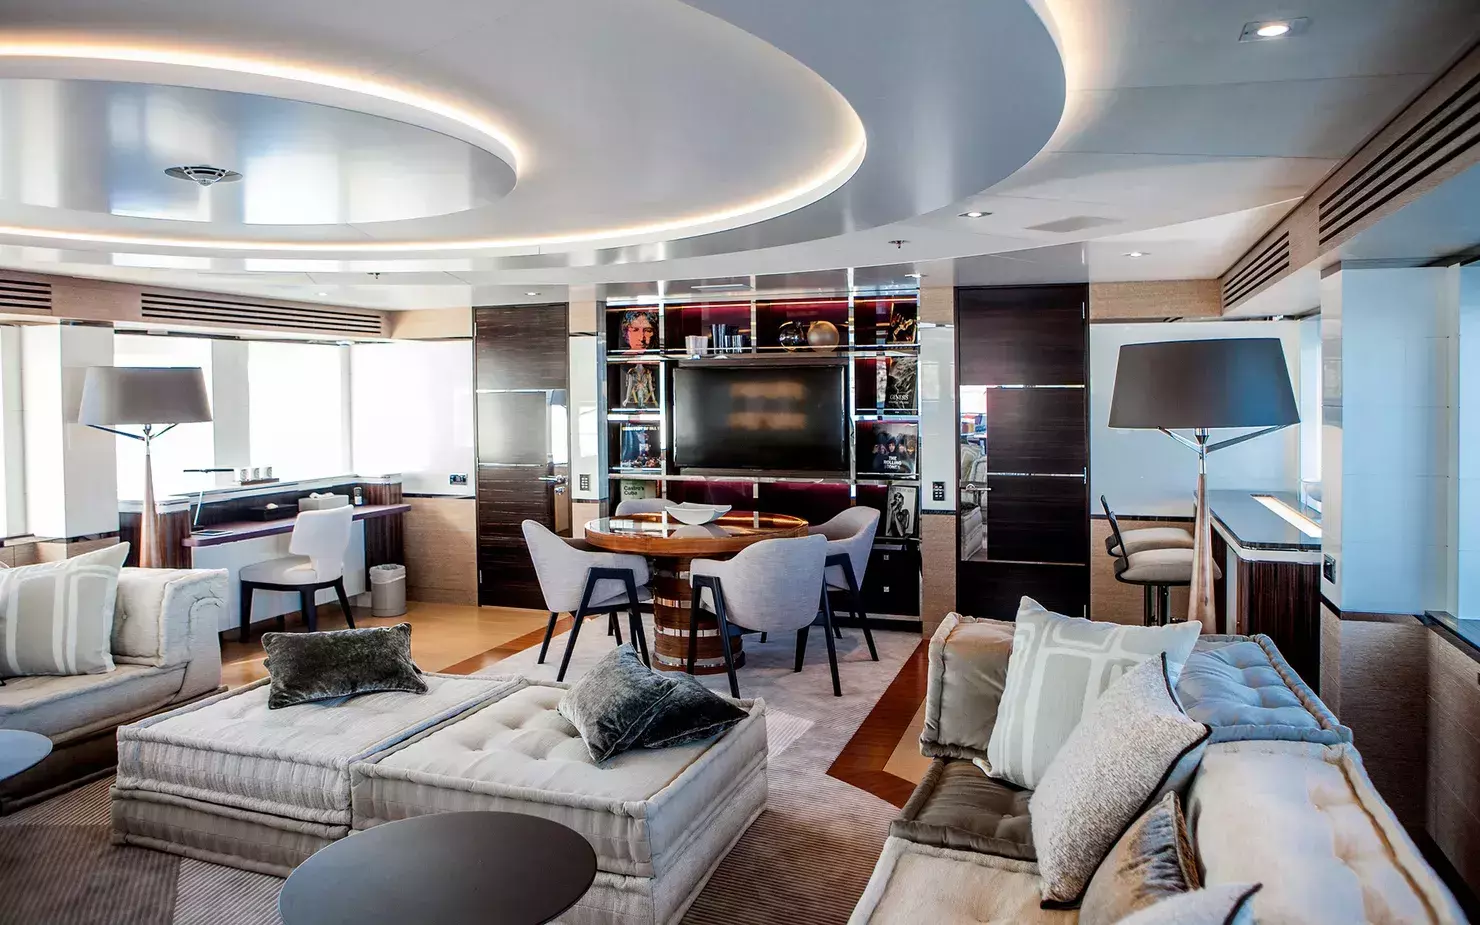 Asya by Heesen - Top rates for a Rental of a private Superyacht in France